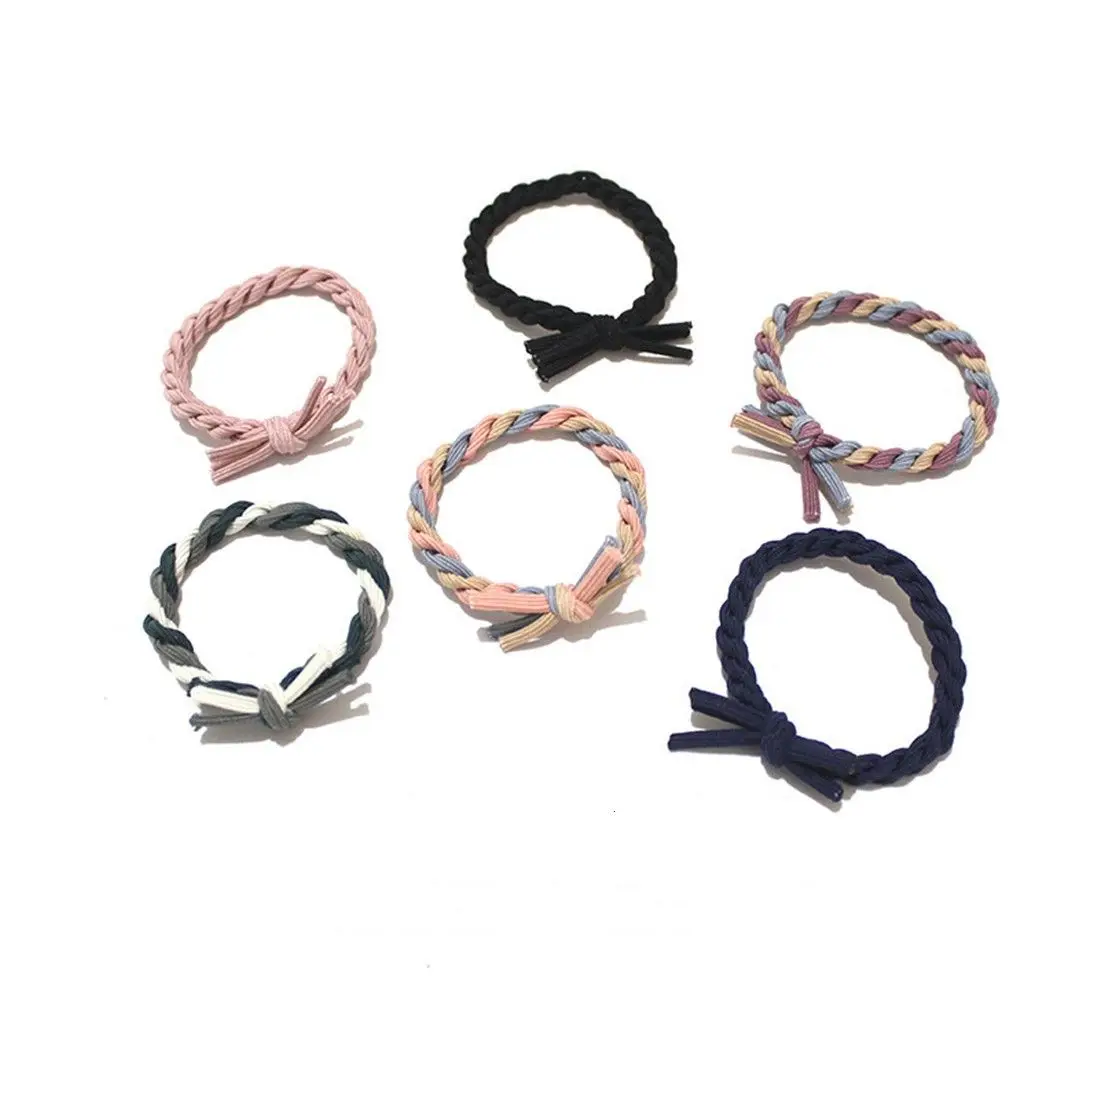 small hair clips 1Pc Concise Color Ponytail Hair Rope High Elastic Tie Hair Thick Rubber Band Hand-woven Head Rope Women Girl Hair Accessories korean hair clips